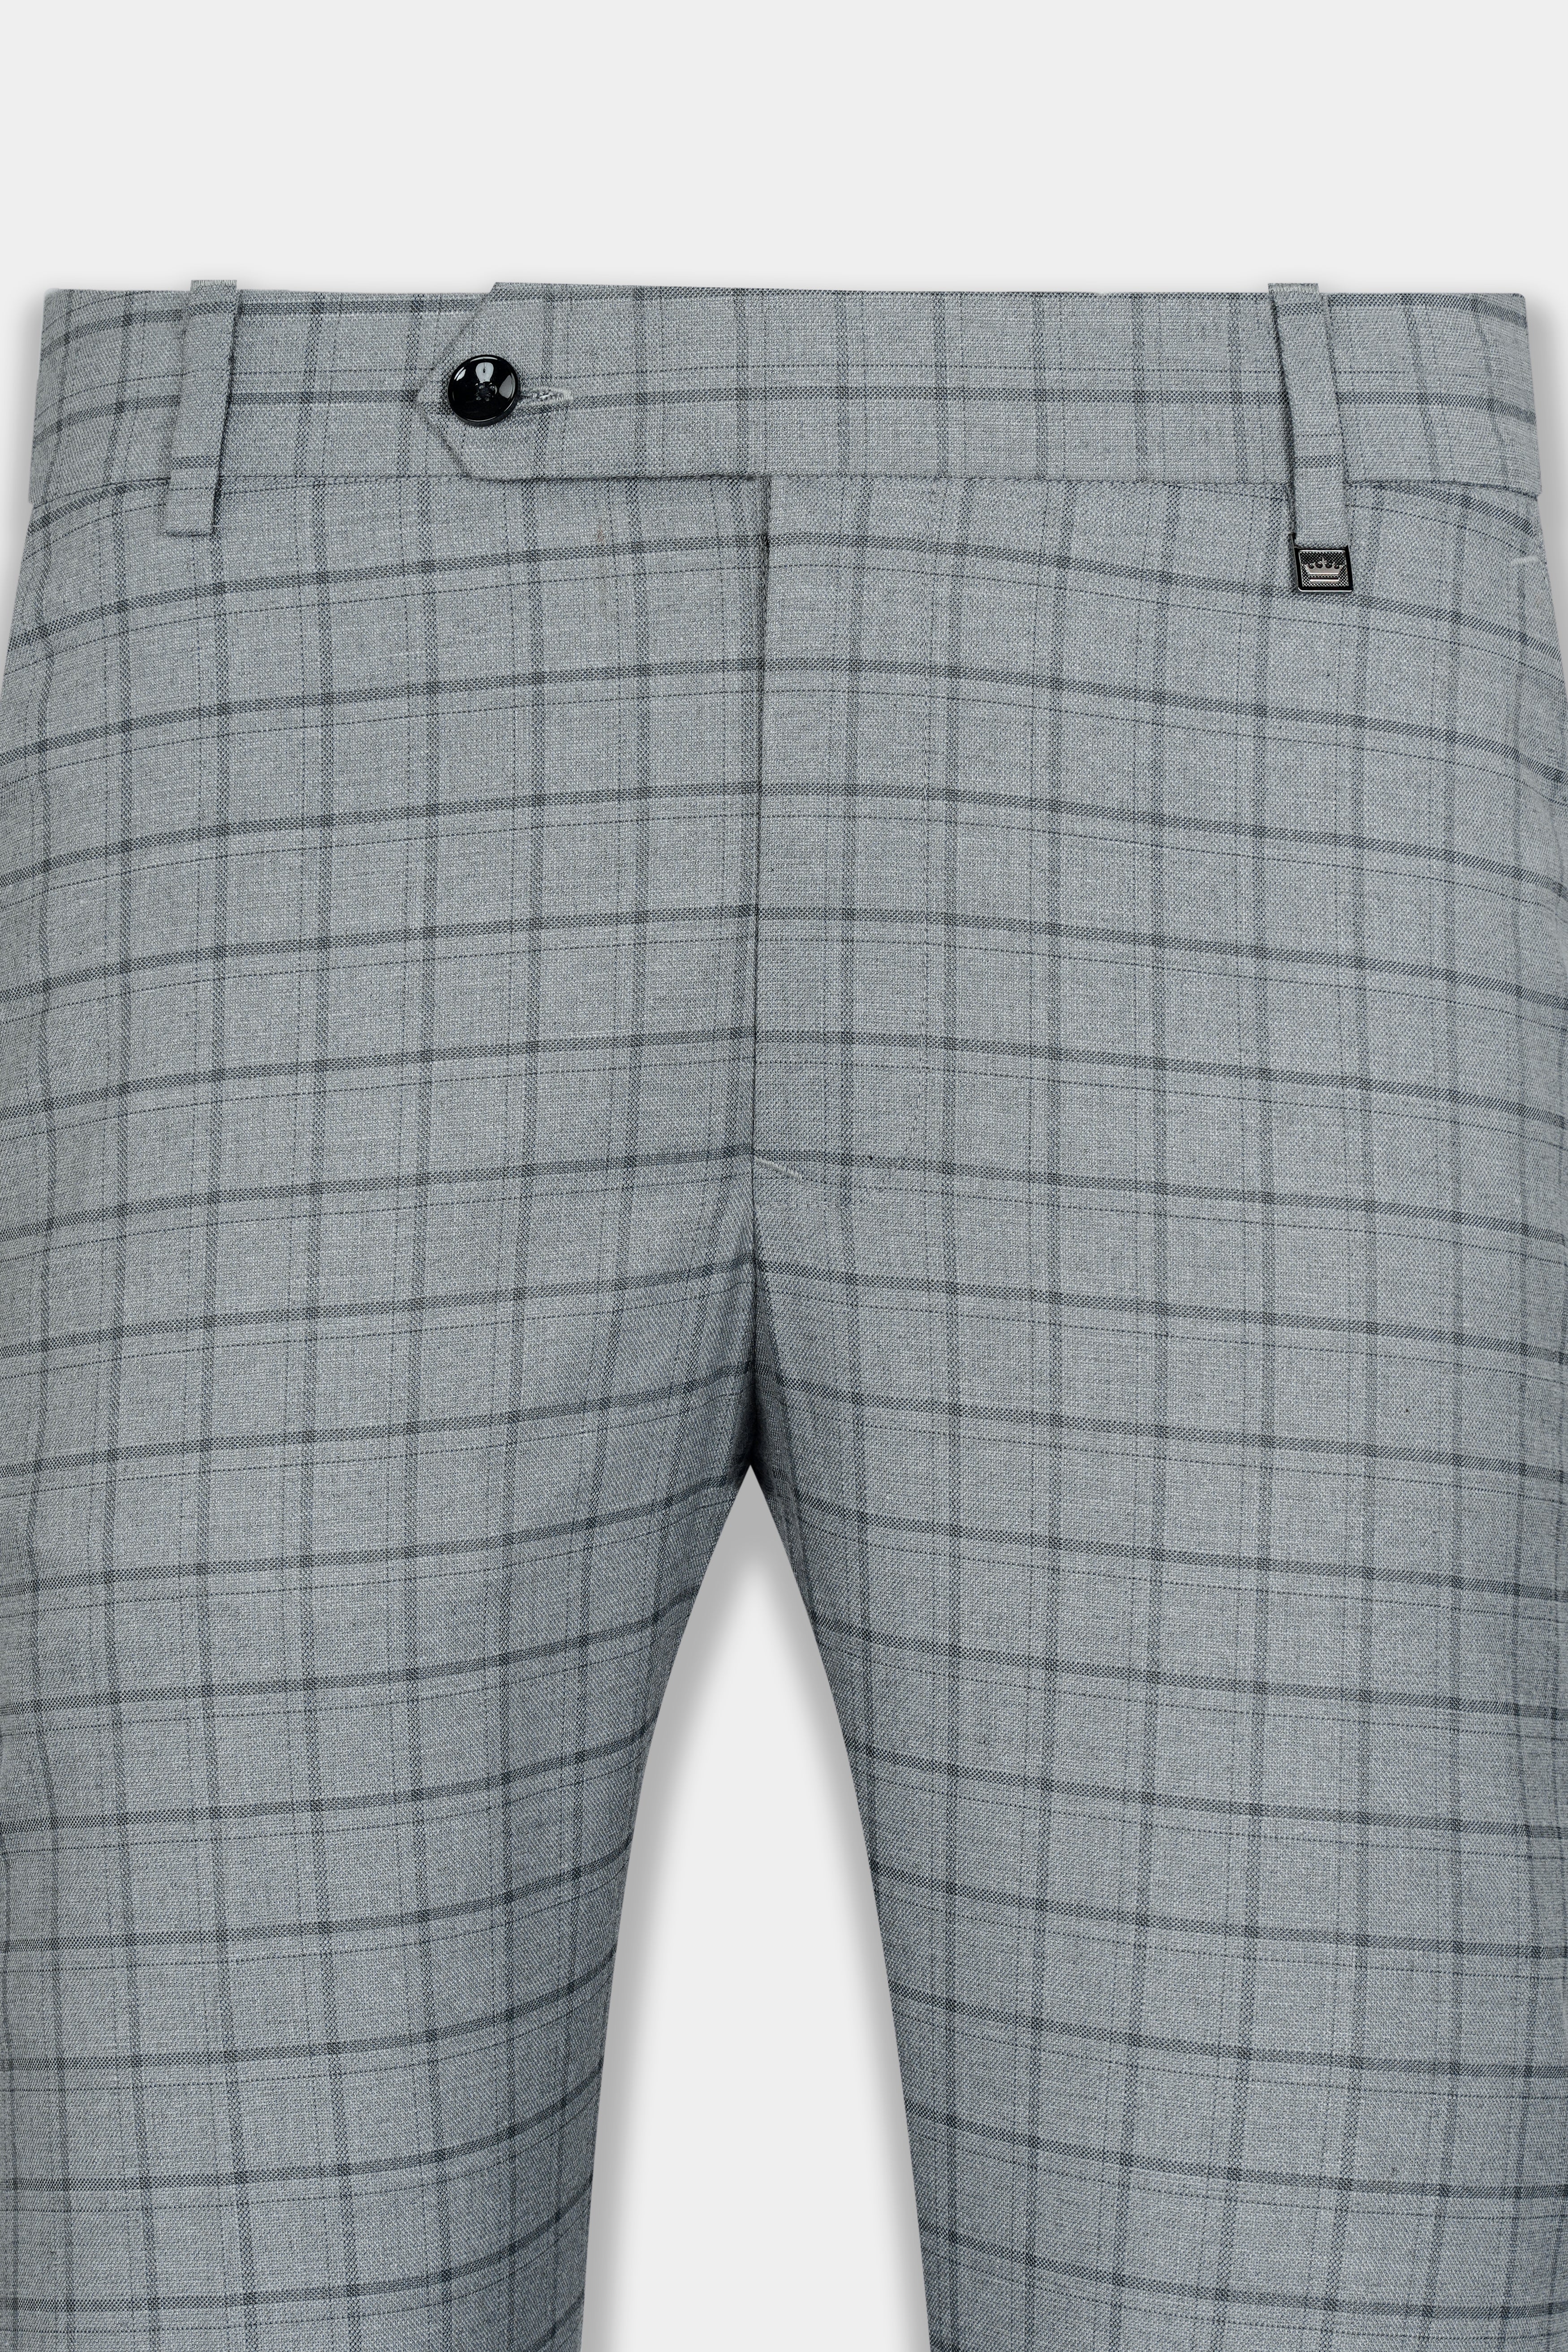 Boulder Gray Checkered Wool Rich Double Breasted Suit ST2930-DB-PP-36,ST2930-DB-PP-38,ST2930-DB-PP-40,ST2930-DB-PP-42,ST2930-DB-PP-44,ST2930-DB-PP-46,ST2930-DB-PP-48,ST2930-DB-PP-50,ST2930-DB-PP-52,ST2930-DB-PP-54,ST2930-DB-PP-56,ST2930-DB-PP-58,ST2930-DB-PP-60